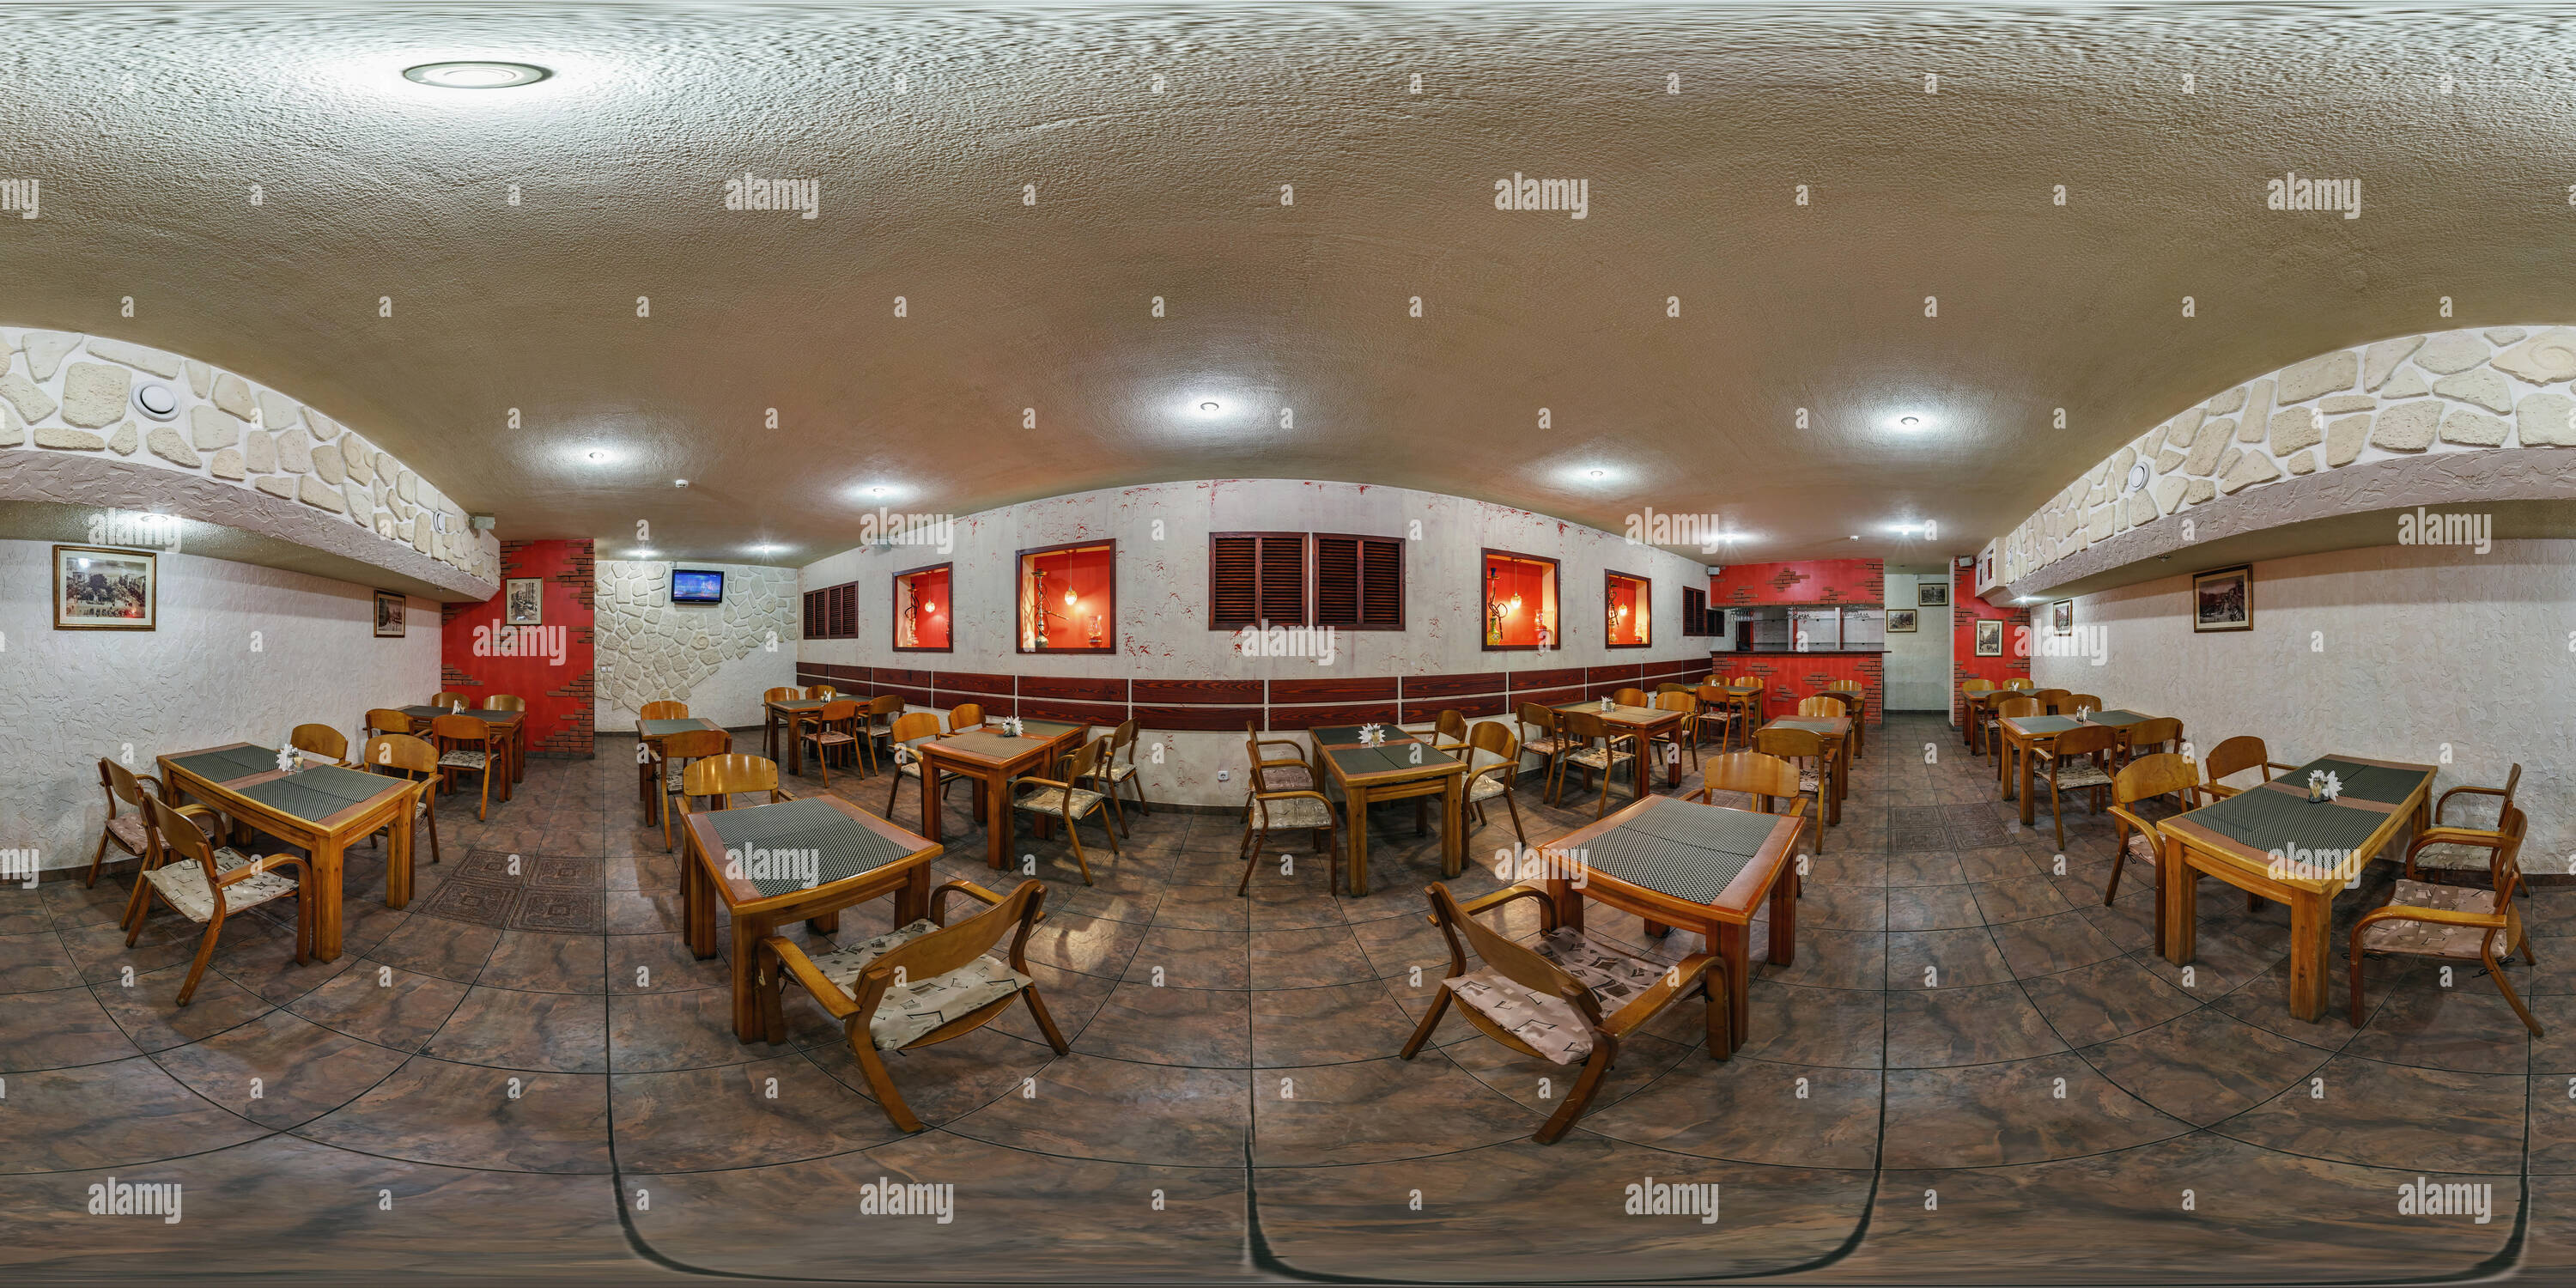 360 degree panoramic view of GOMEL, BELARUS - FEBRUARY 14, 2012: 360 panorama in Inside interior of stylish cafe with red windows. Full 360 degree angle view seamless panorama in